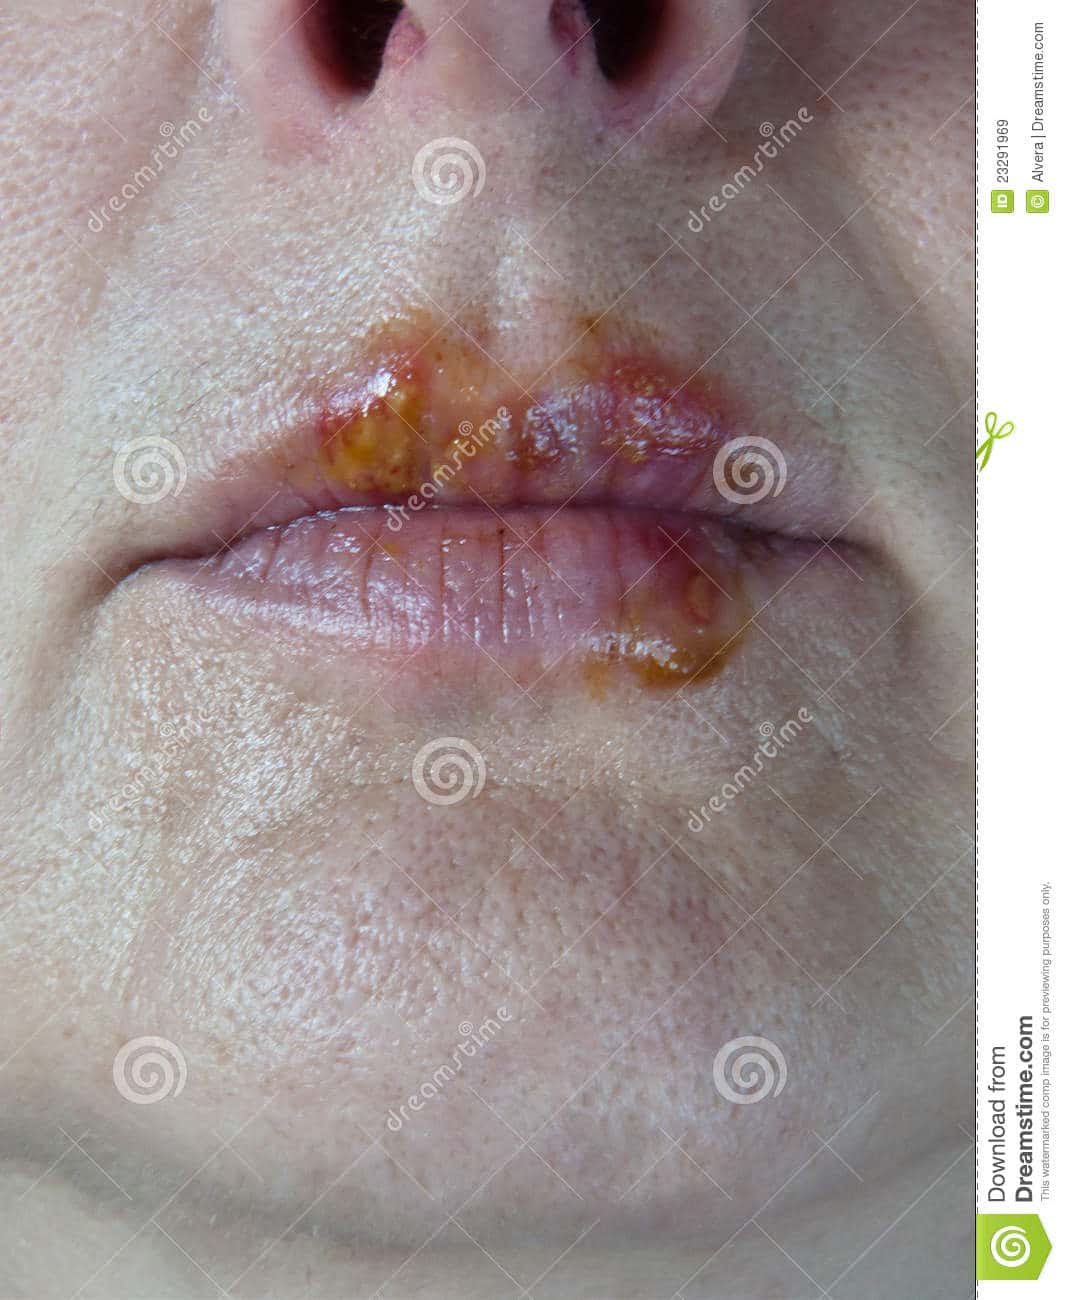 Herpes Mouth Sores Lips Virus Stock Image